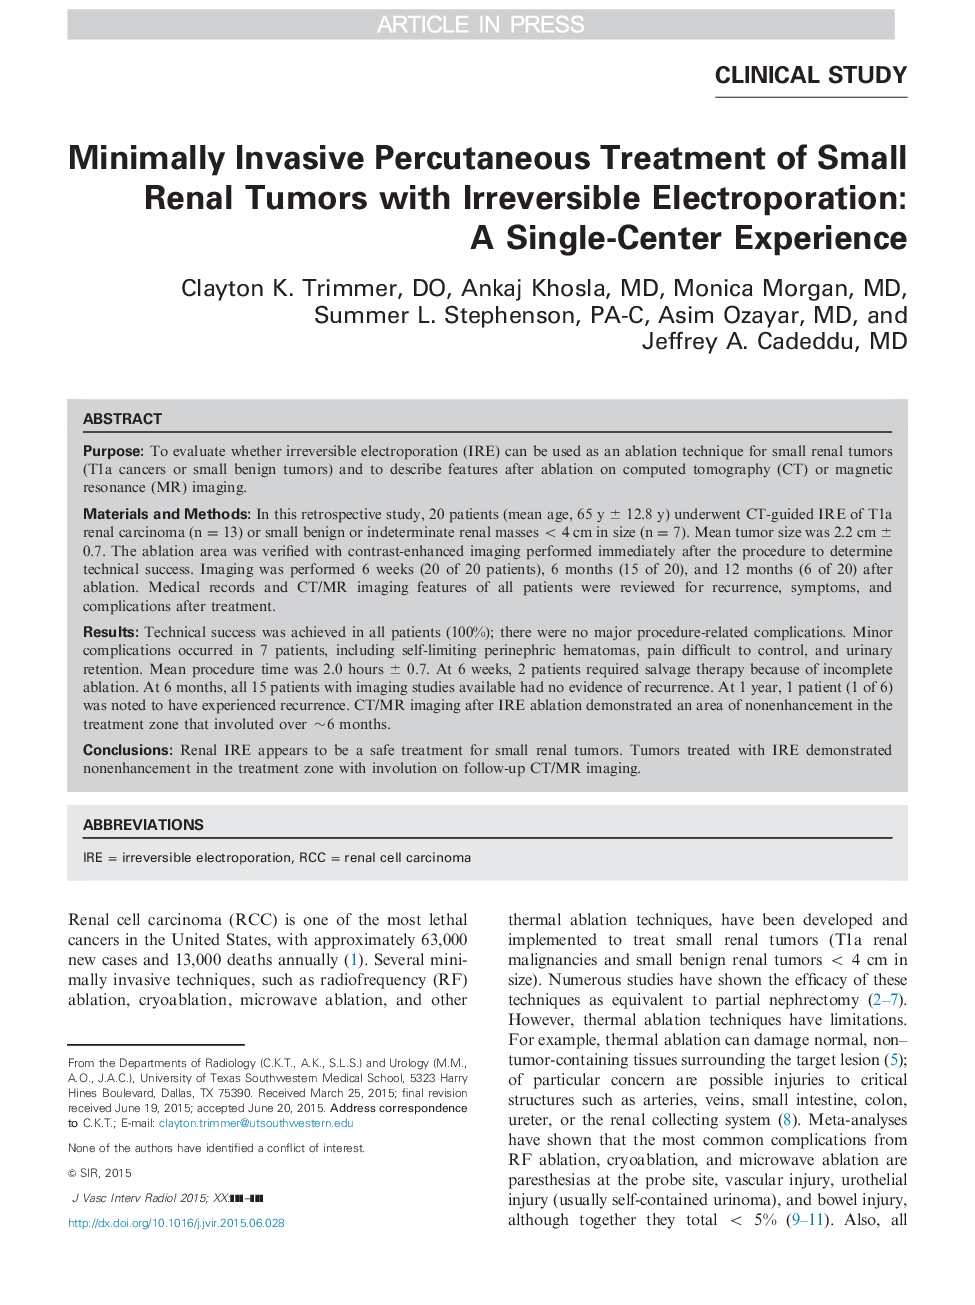 Minimally Invasive Percutaneous Treatment of Small Renal Tumors with Irreversible Electroporation: A Single-Center Experience